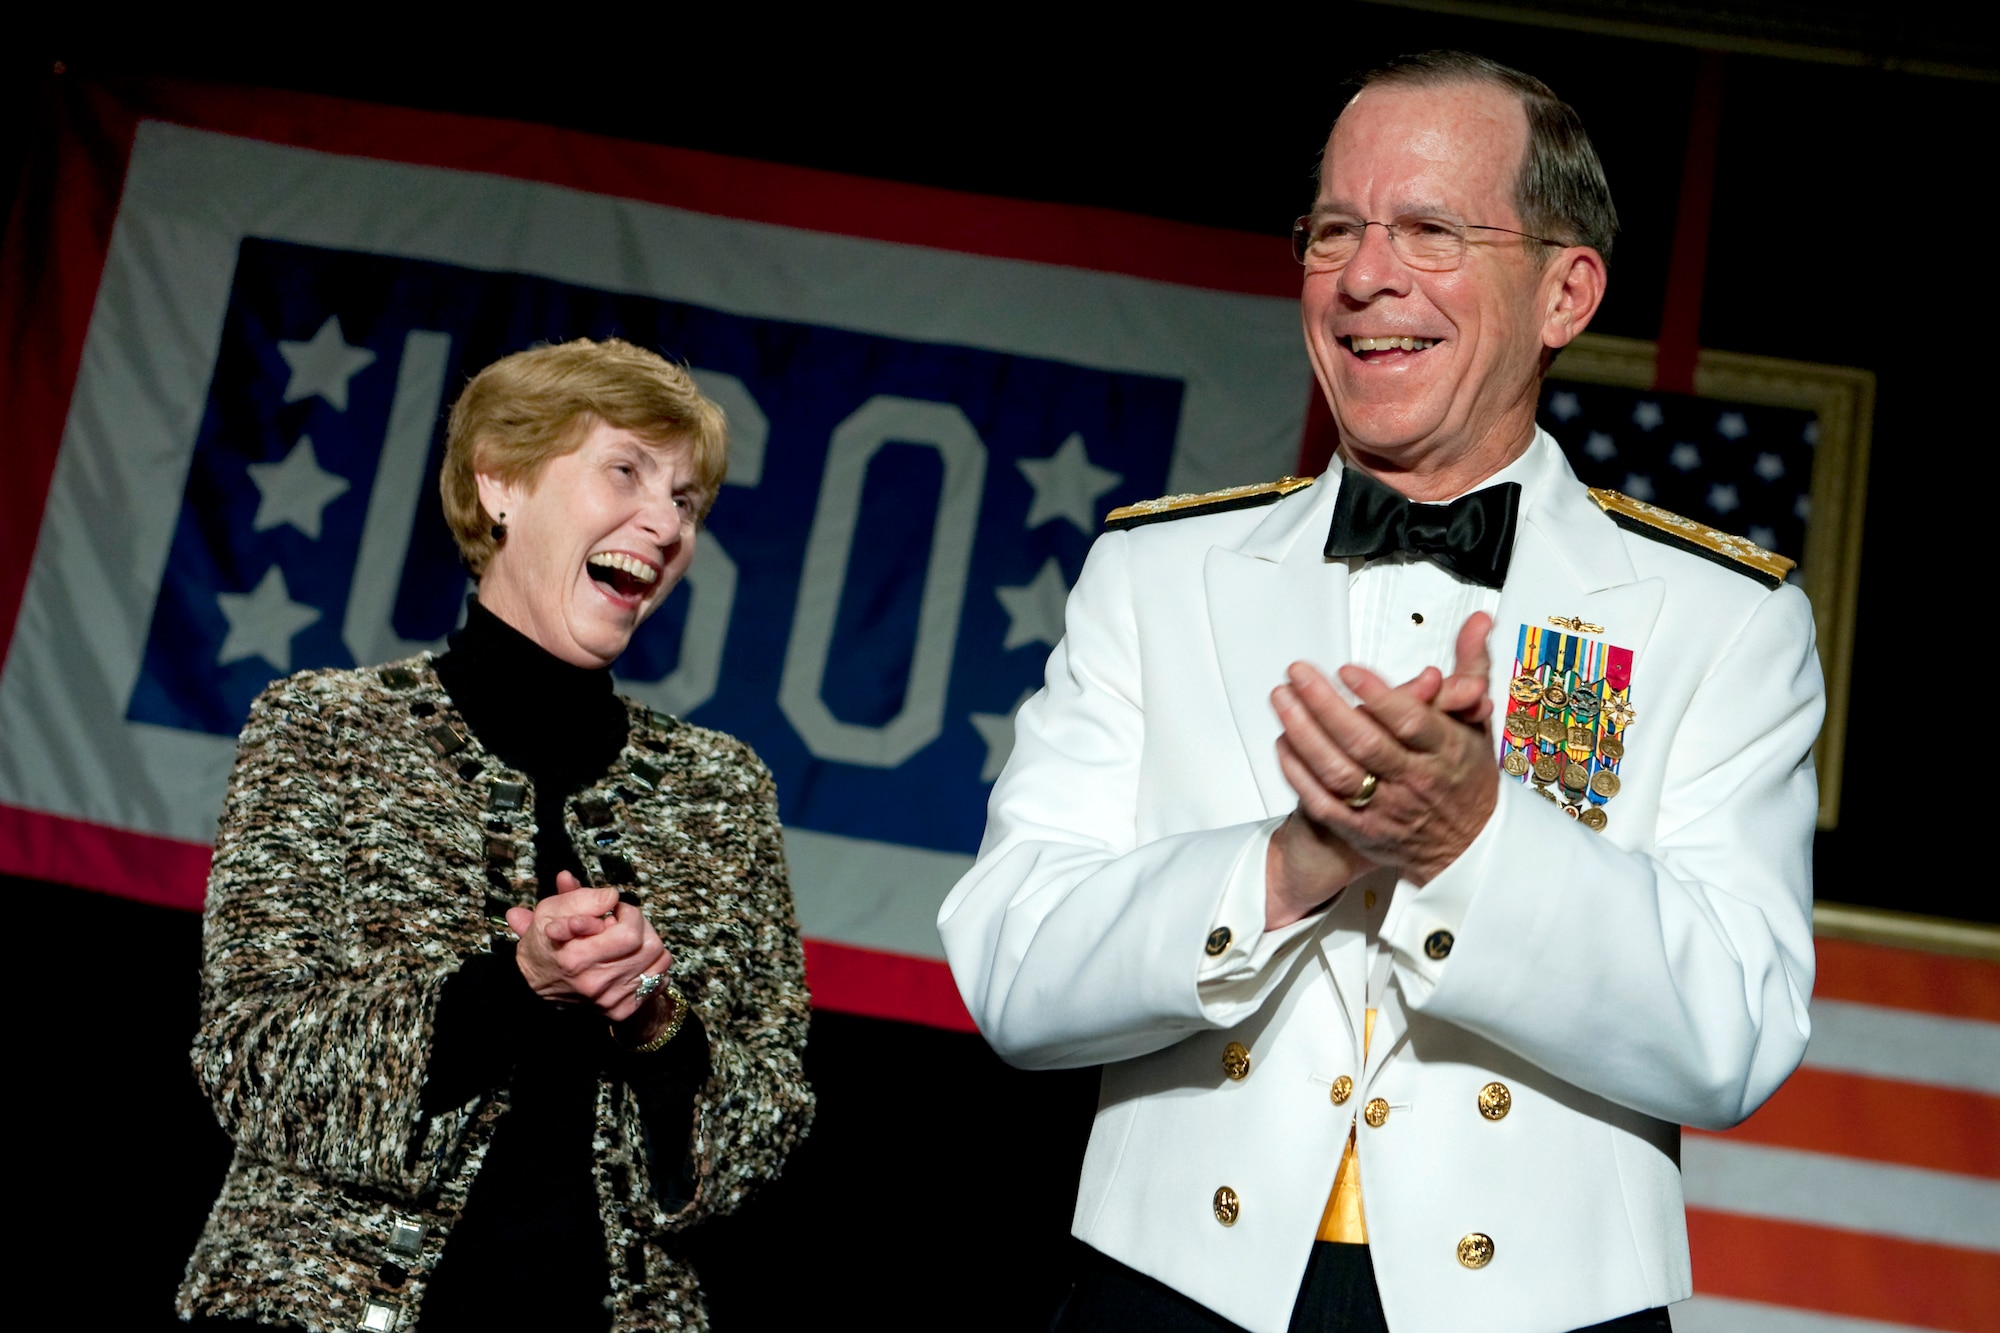 Navy Adm. Mike Mullen, chairman of the Joint Chiefs of Staff, and his wife, Deborah, share a laugh during the 2011 USO Metro Awards Dinner in Washington April 12, 2011. (Defense Department photo/Petty Officer 1st Class Chad J. McNeely)